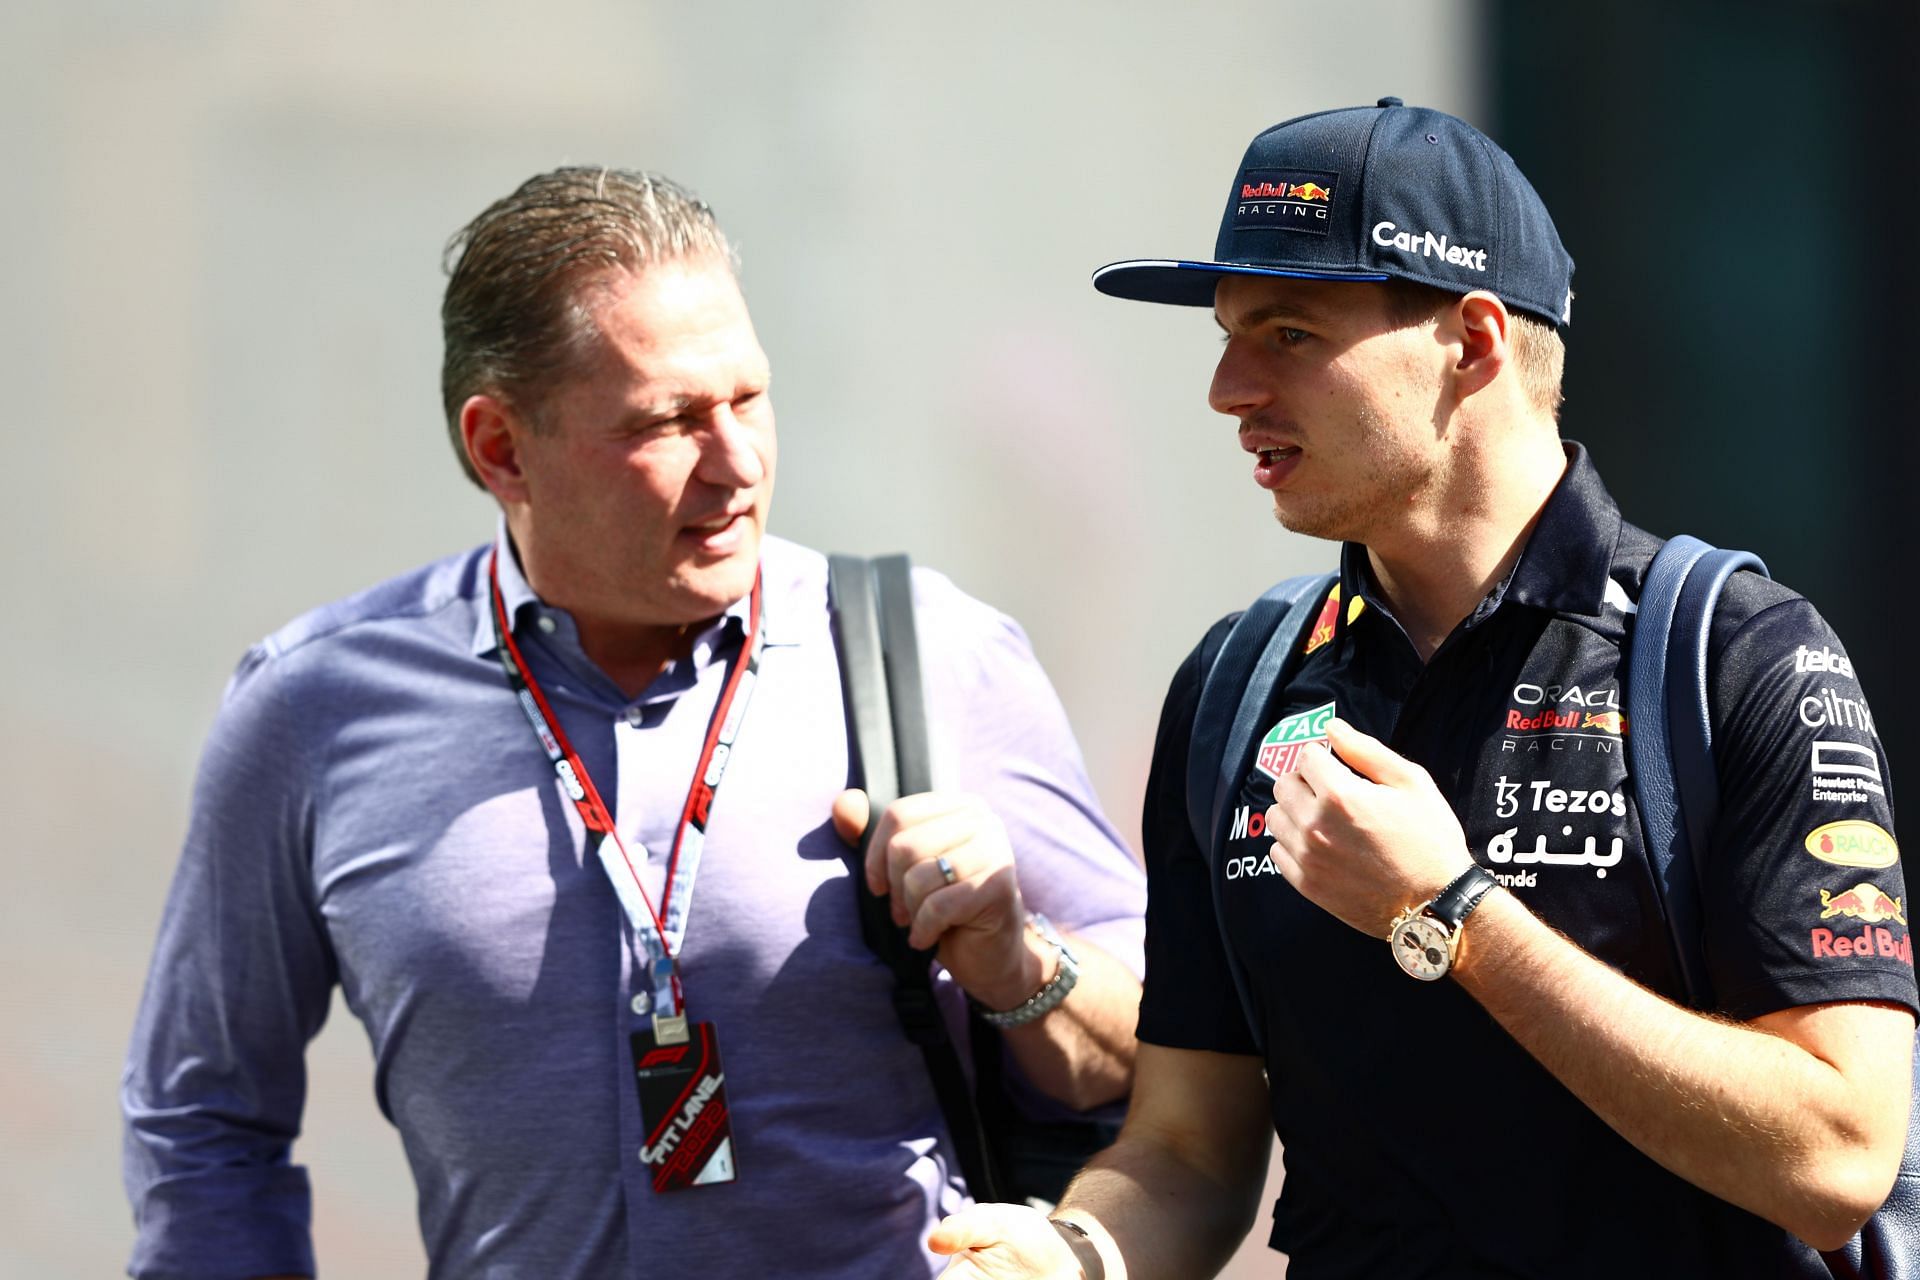 Jos Verstappen (left) felt Red Bull should have pushed the strategy in favor of Max Verstappen (right) in Monaco